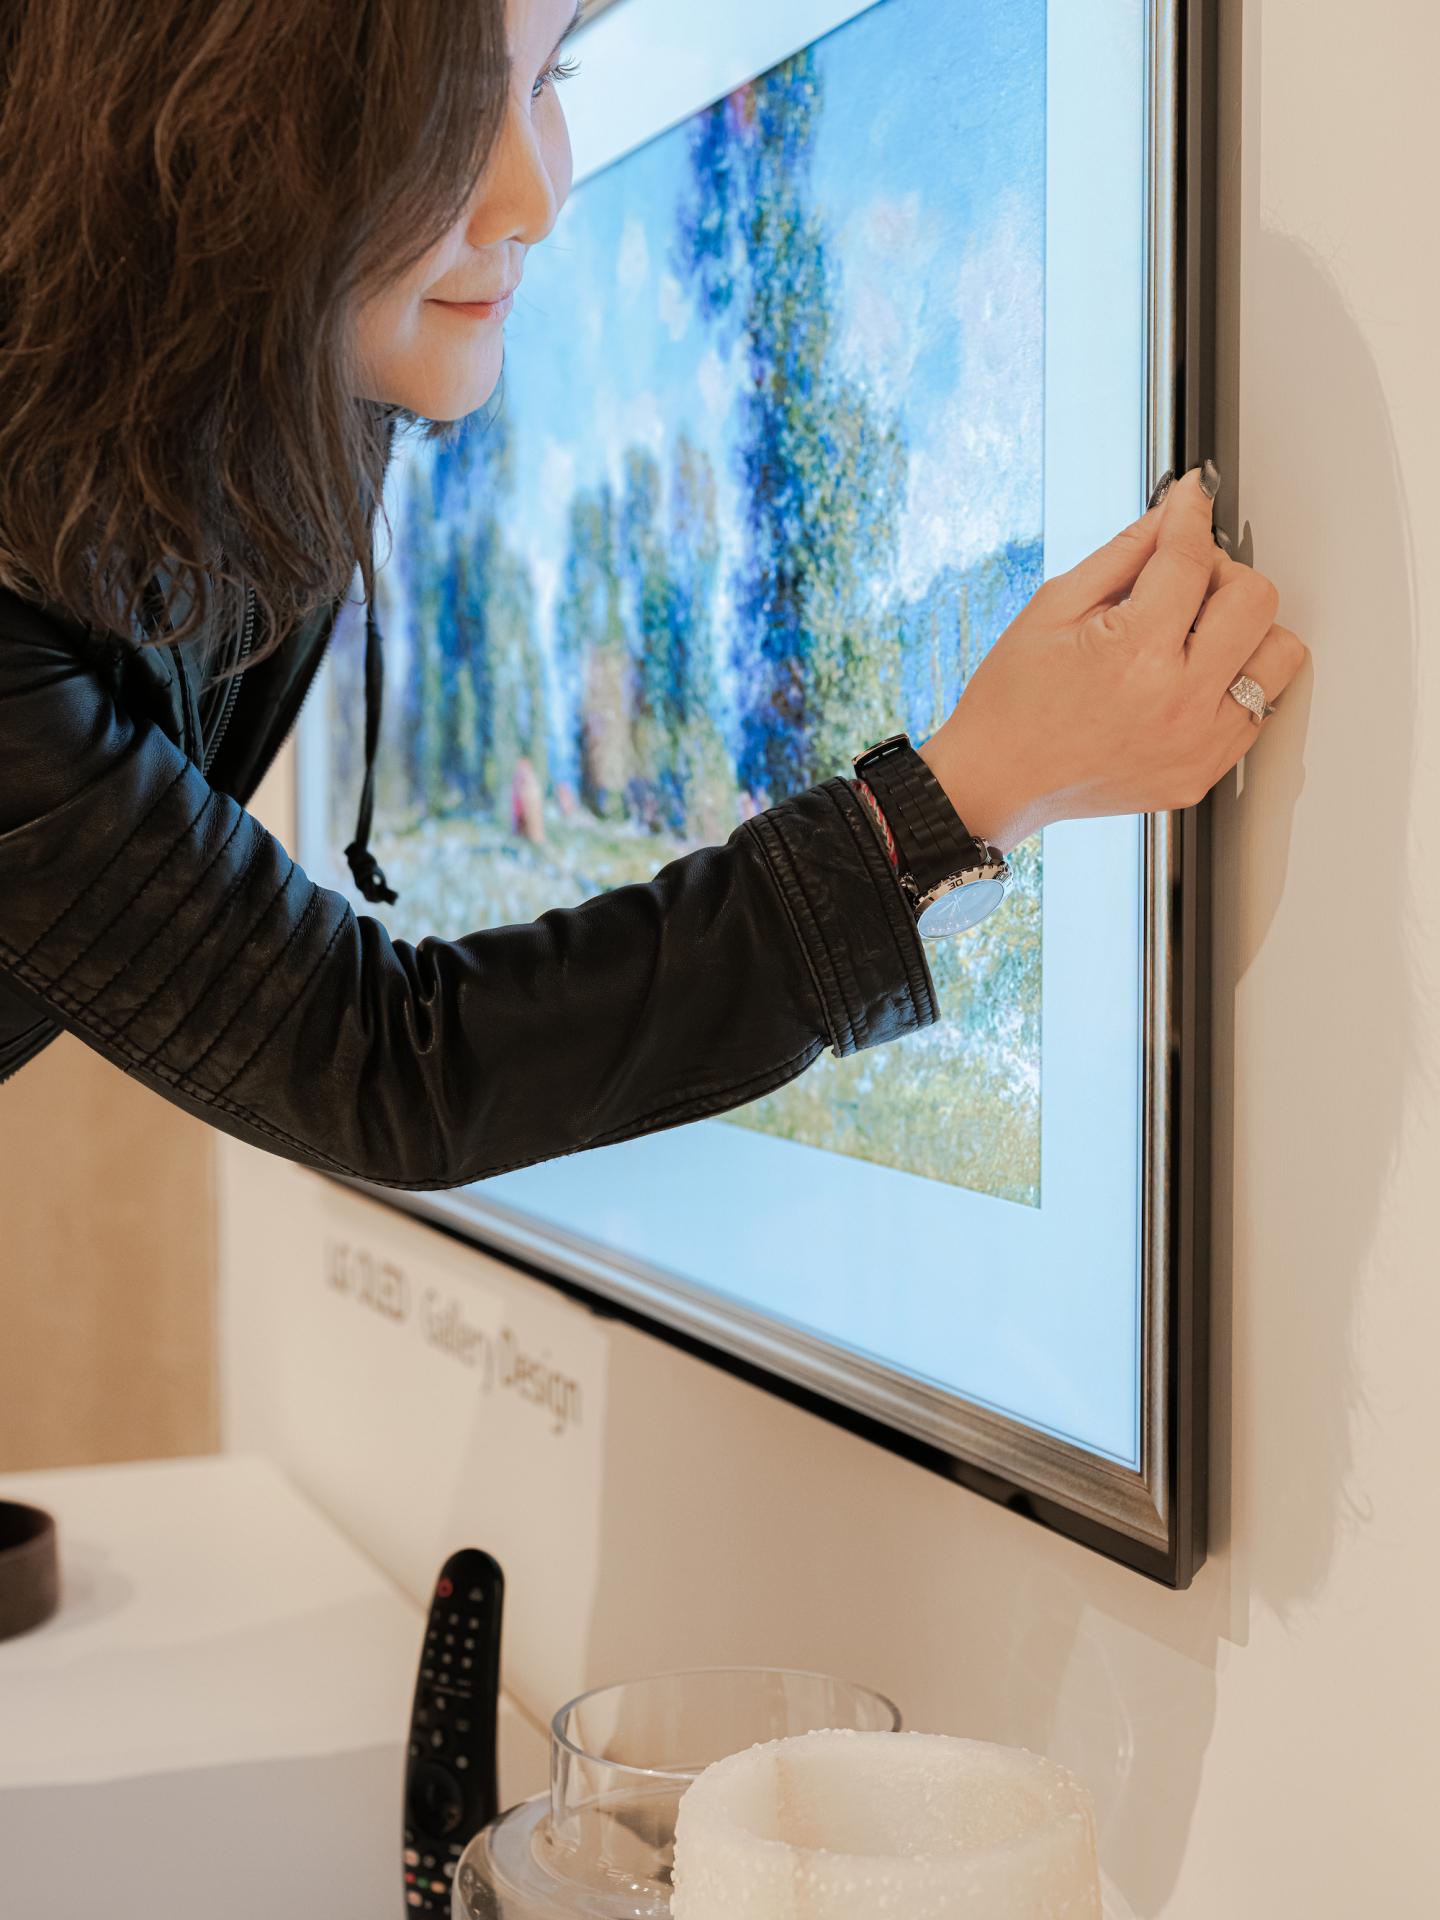 LG Blends Art and Technology with Picture-perfect OLED GX TV Series 